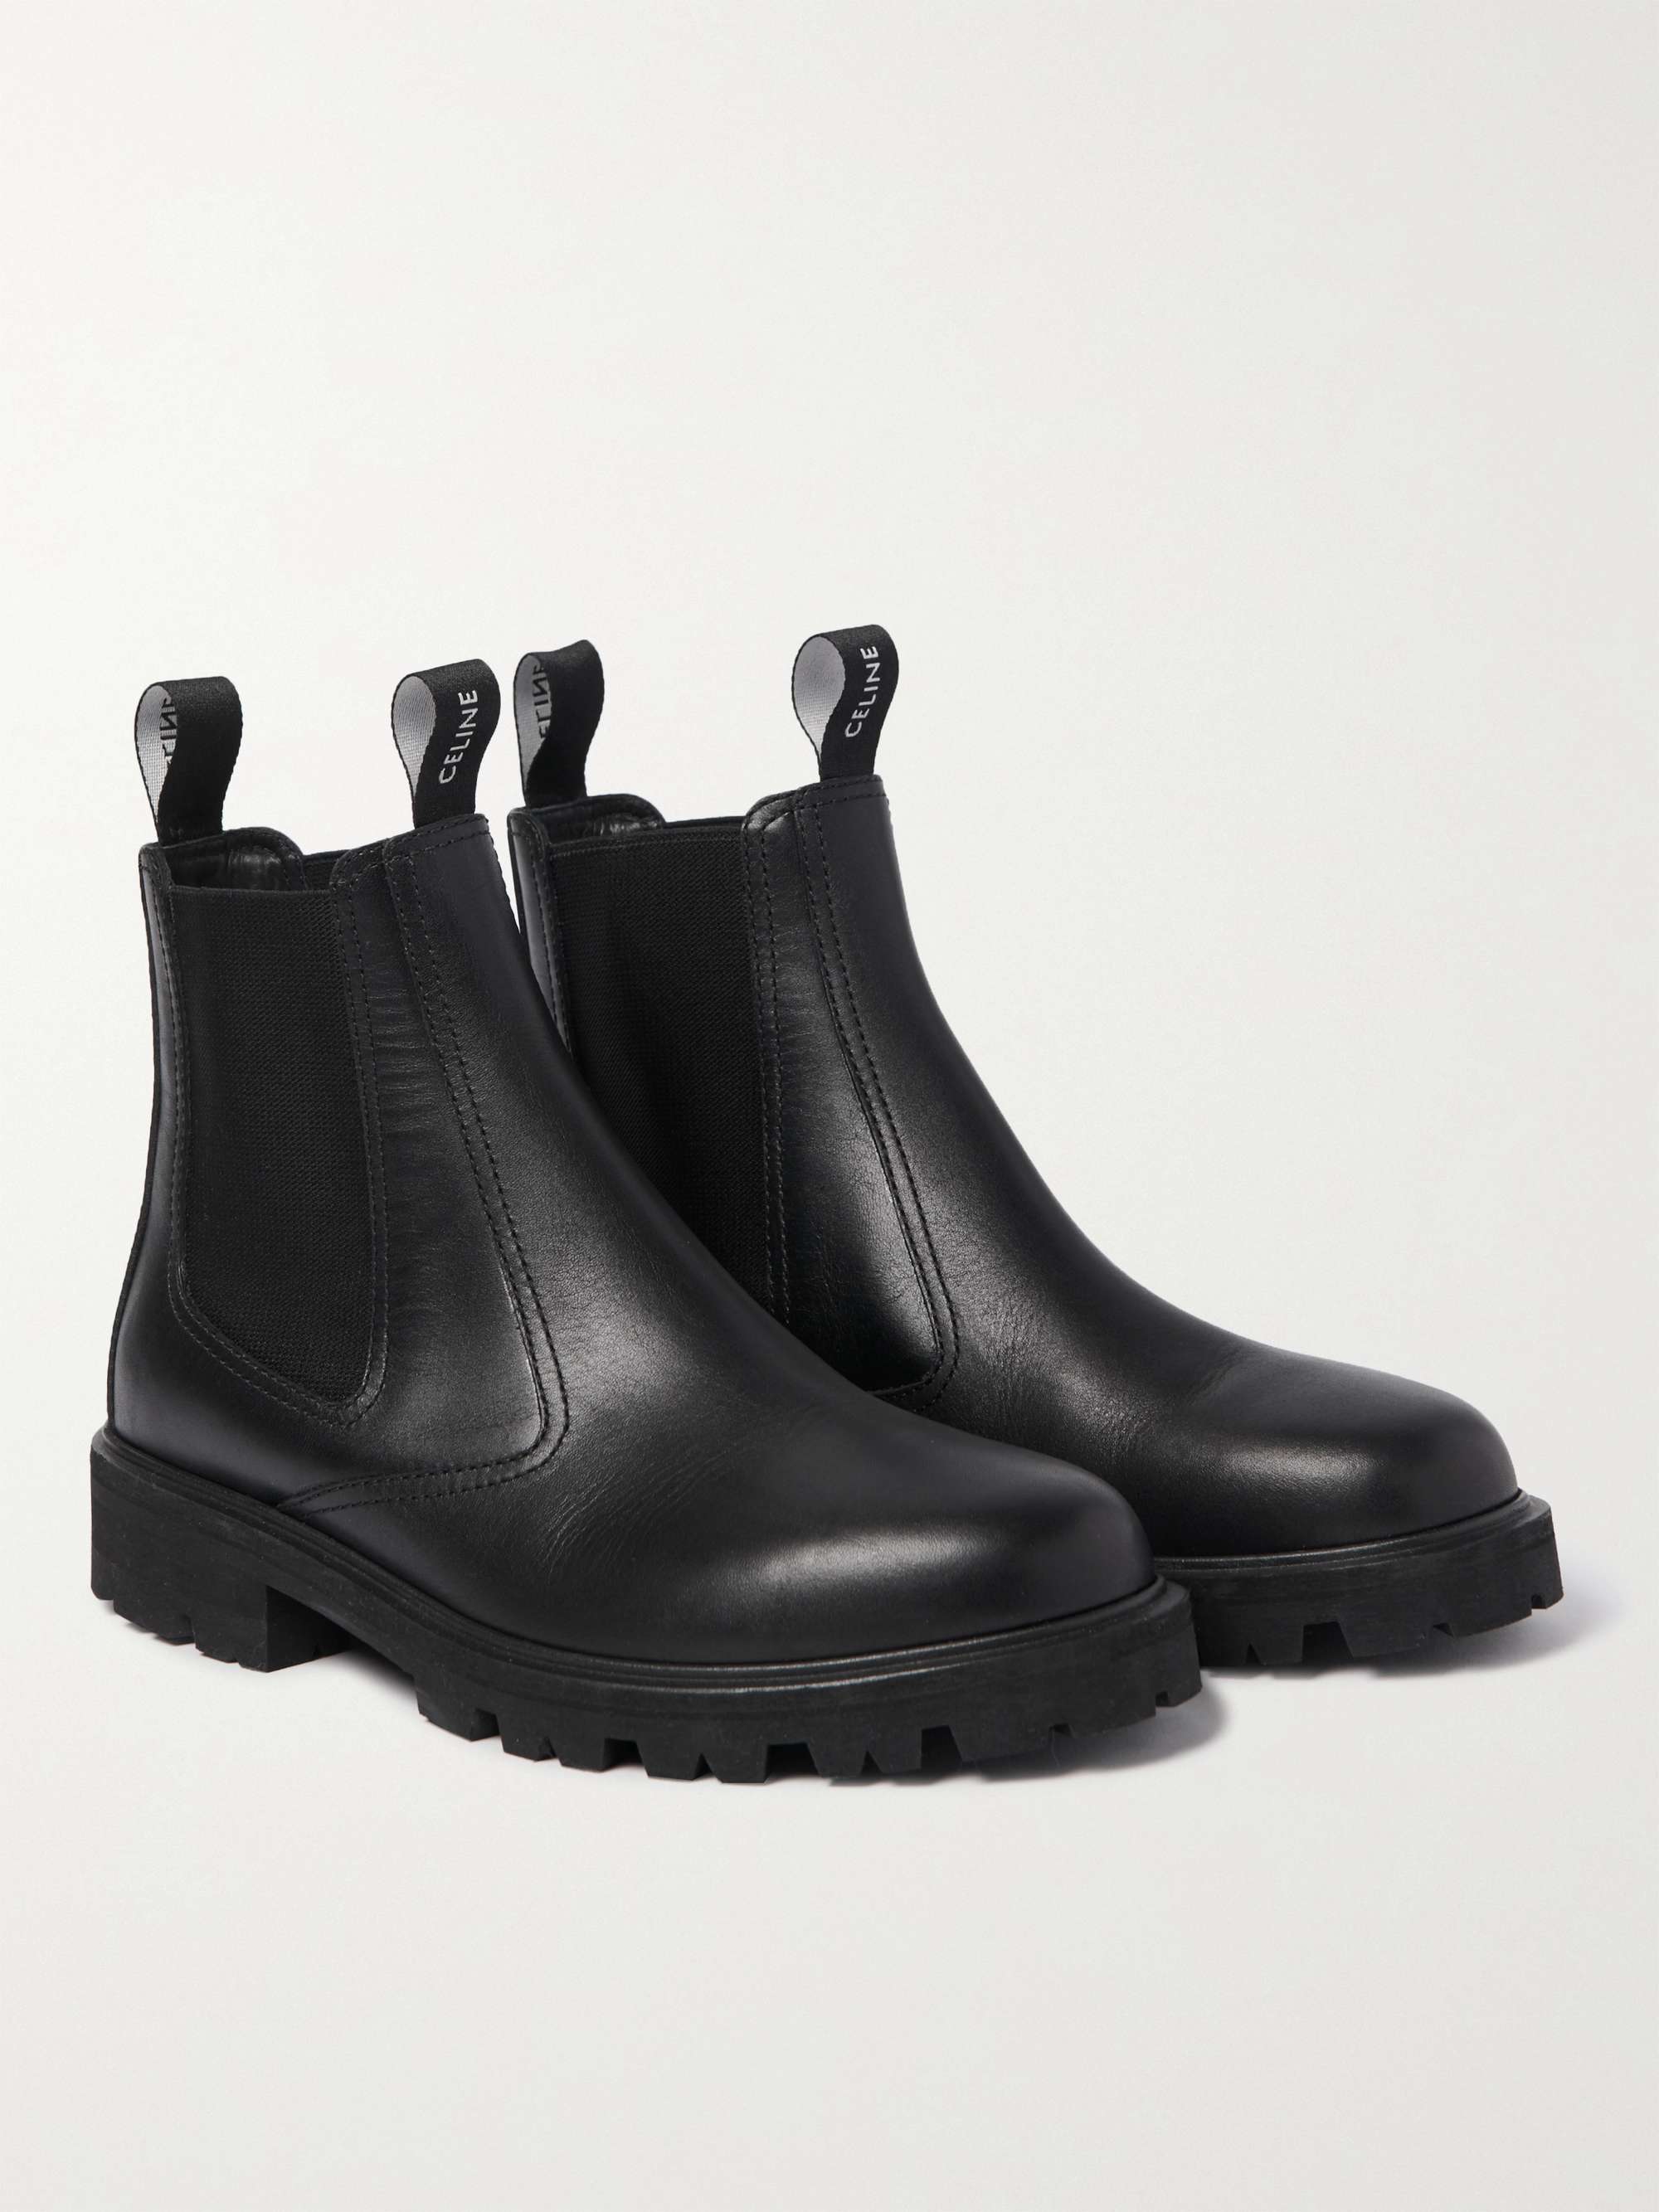 CELINE Margaret Waxed-Leather Chelsea Boots